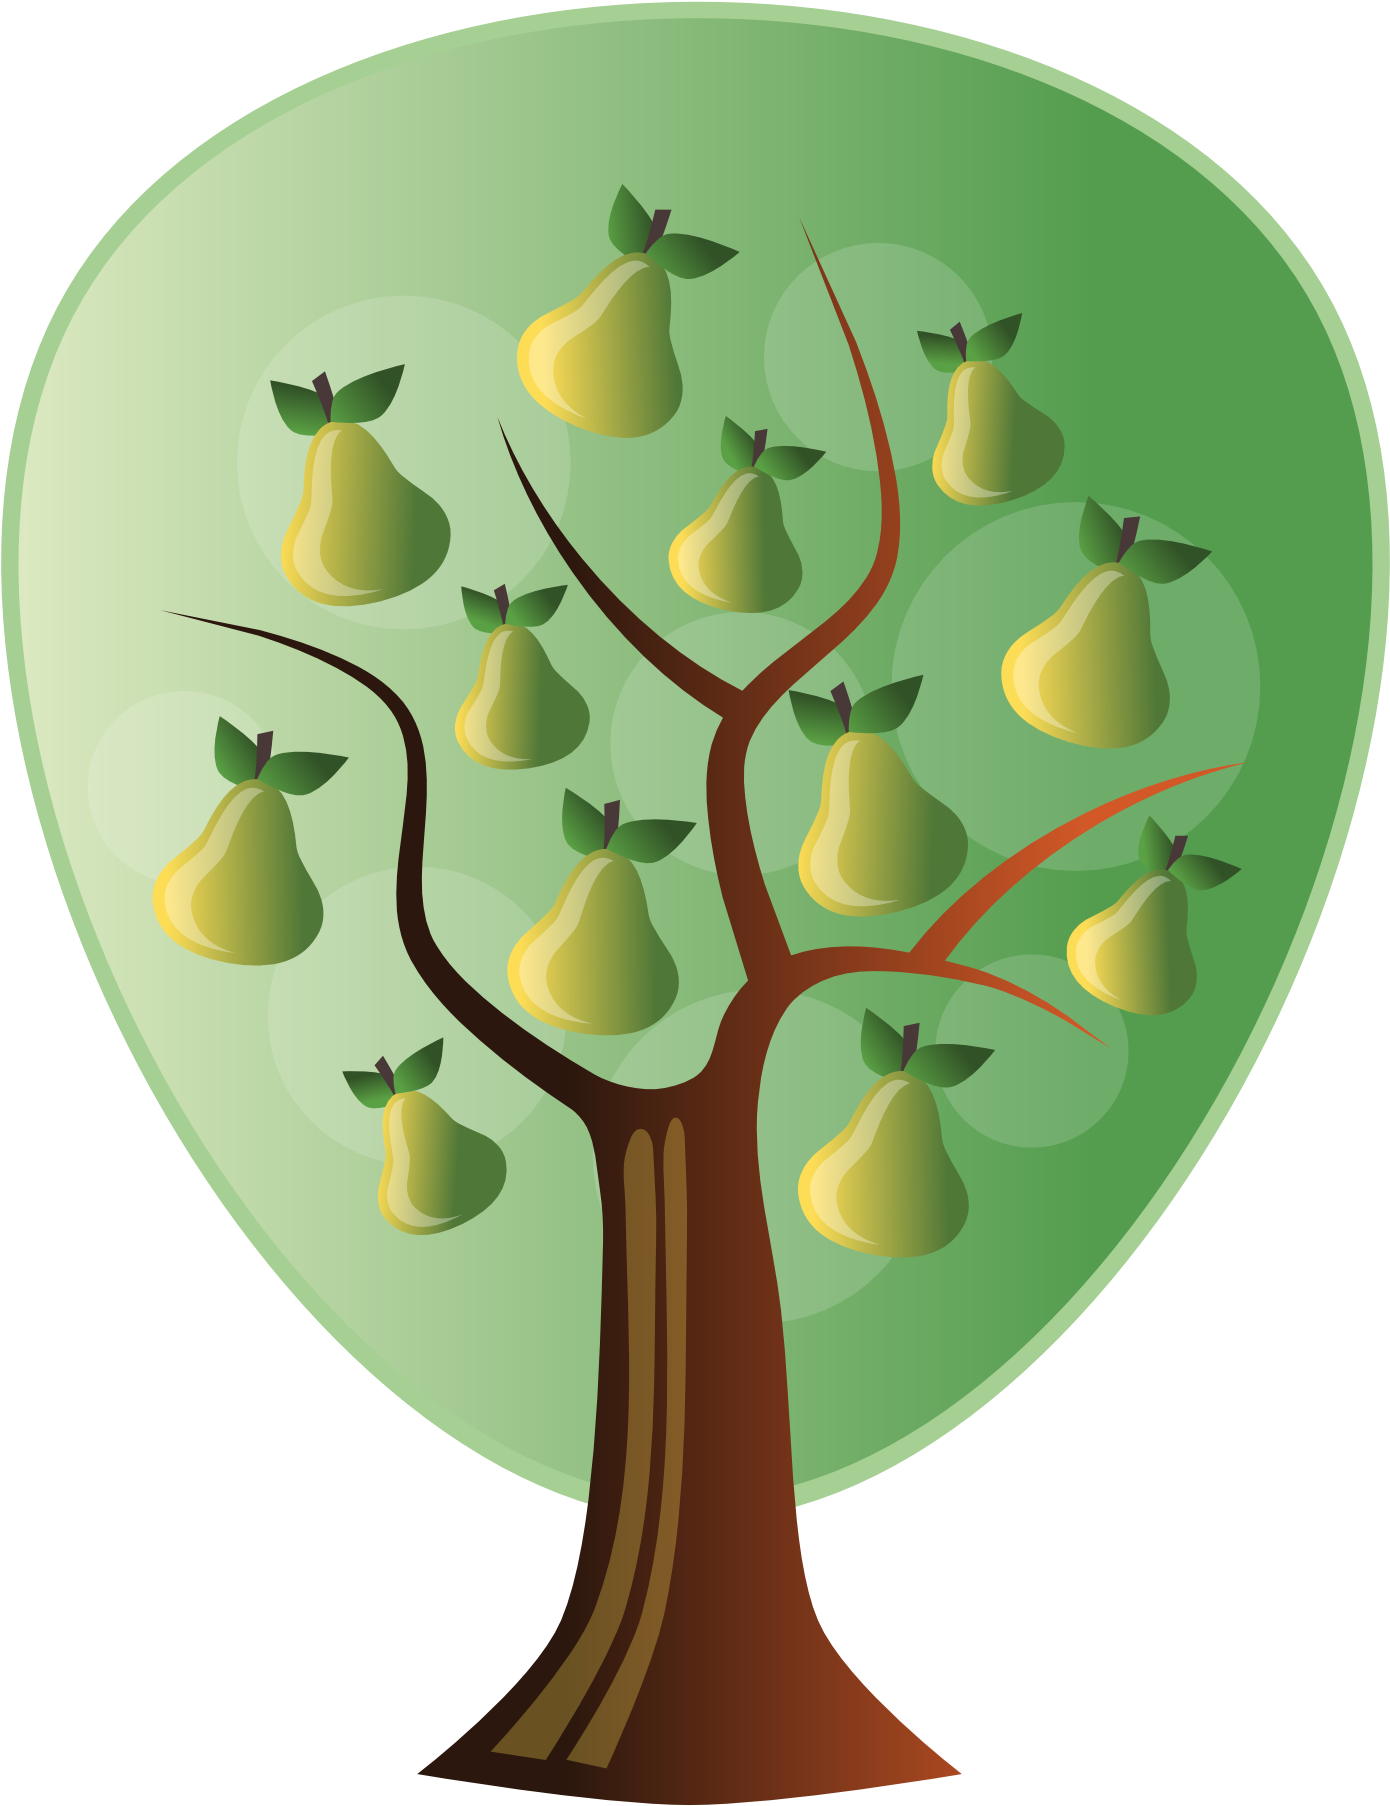 A Tree With Pears On It